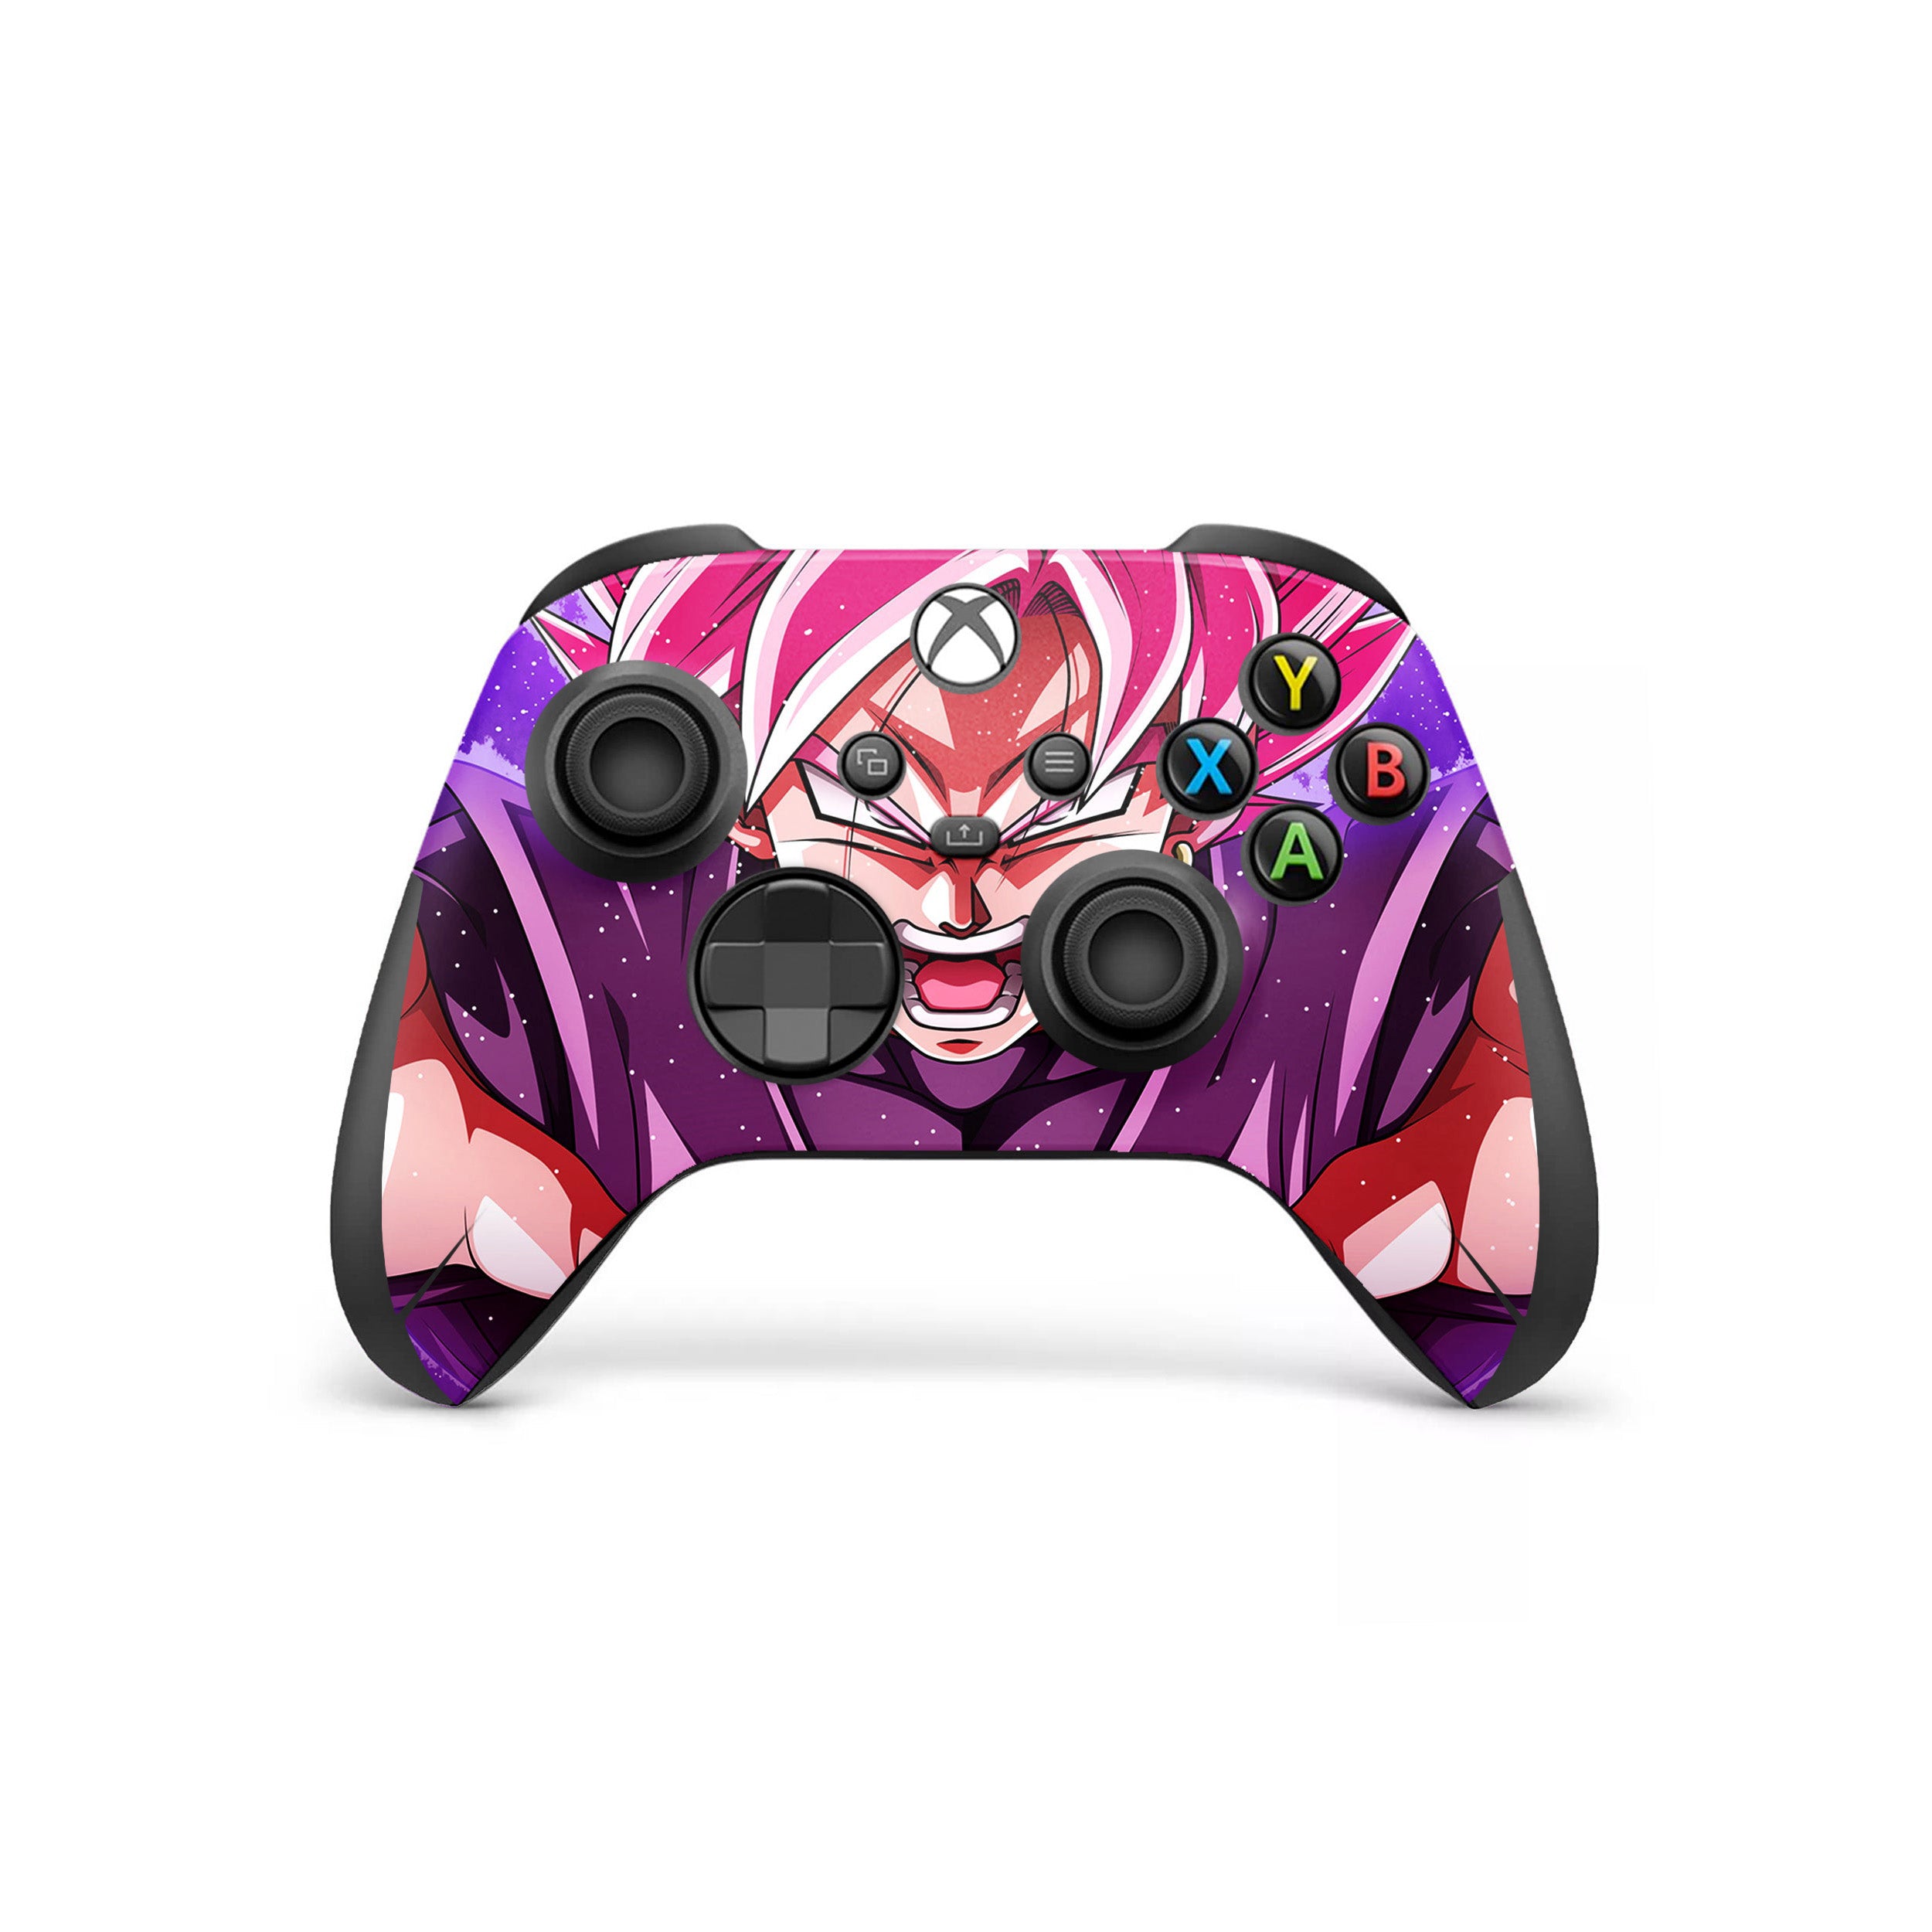 A video game skin featuring a Dragon Ball Super Goku design for the Xbox Wireless Controller.